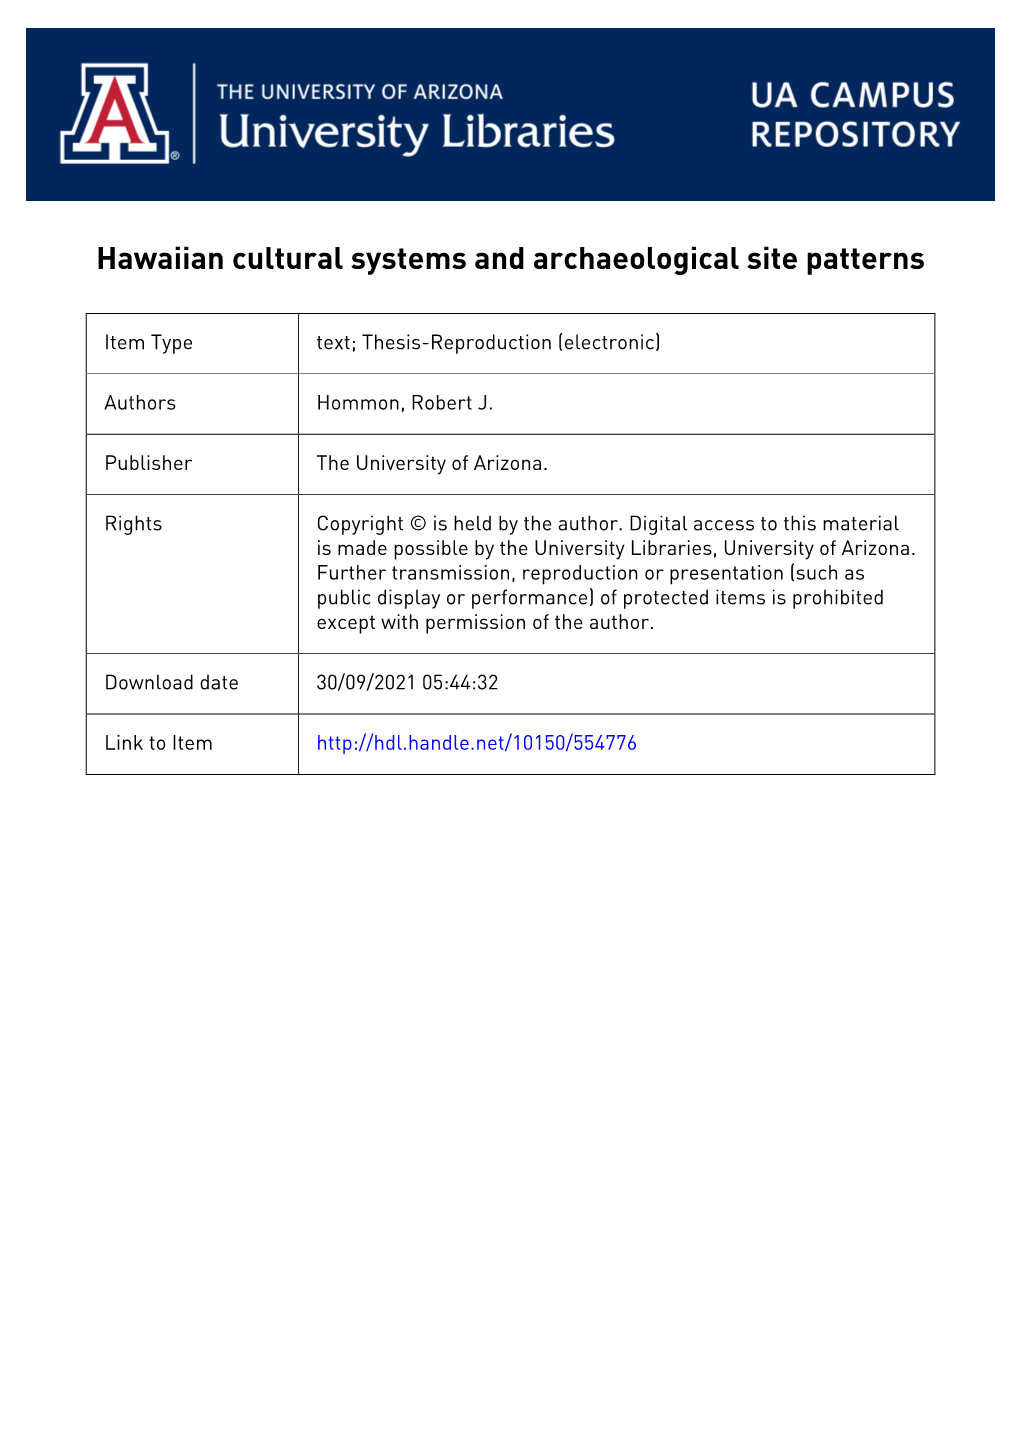 Hawaiian Cultural Systems and Archaeological Site Patterns